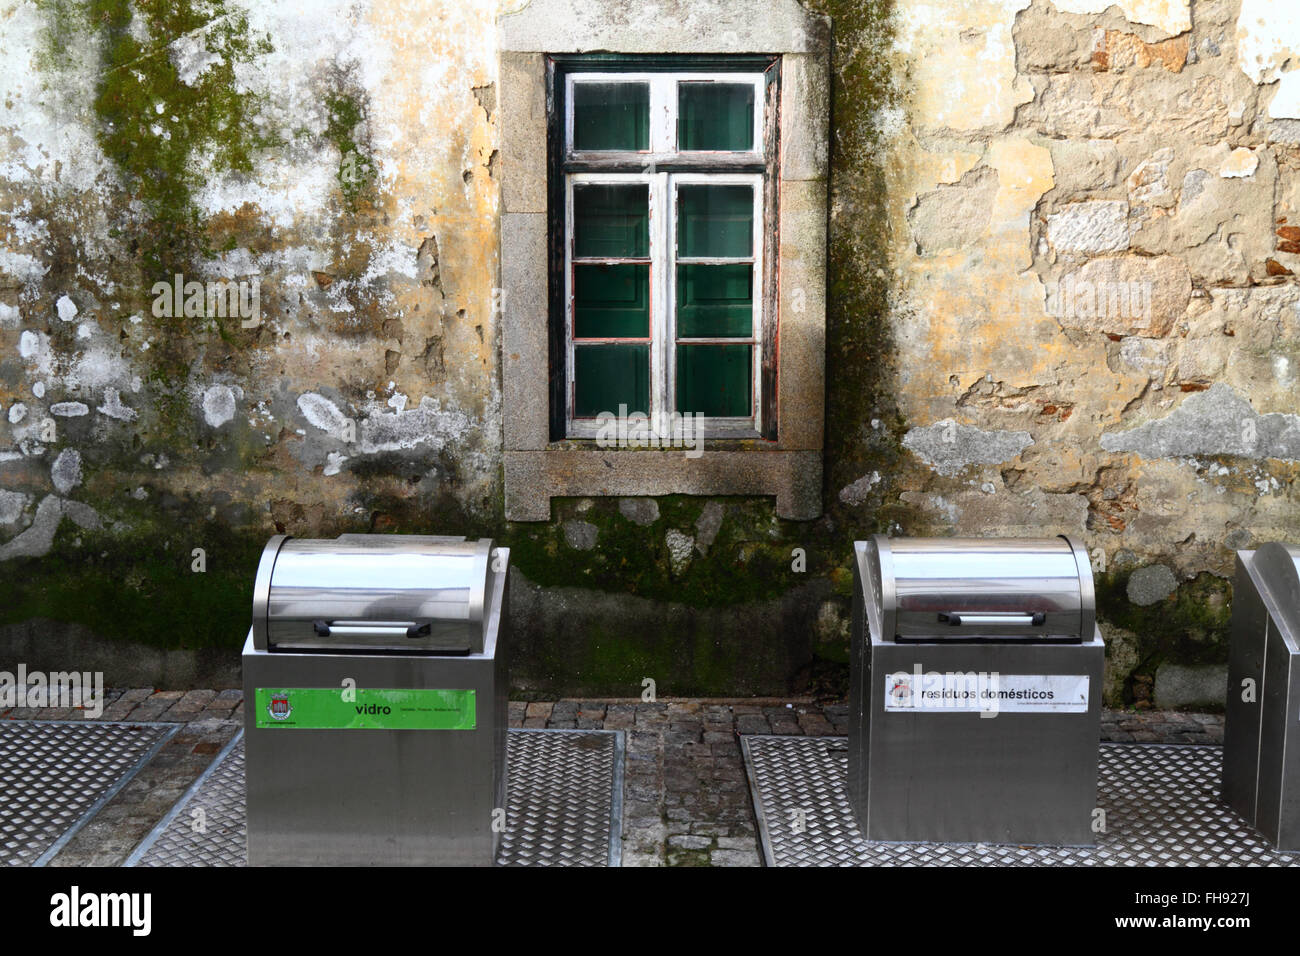 New metal recycling bins for glass and domestic waste outside old stone house, Caminha, northern Portugal Stock Photo